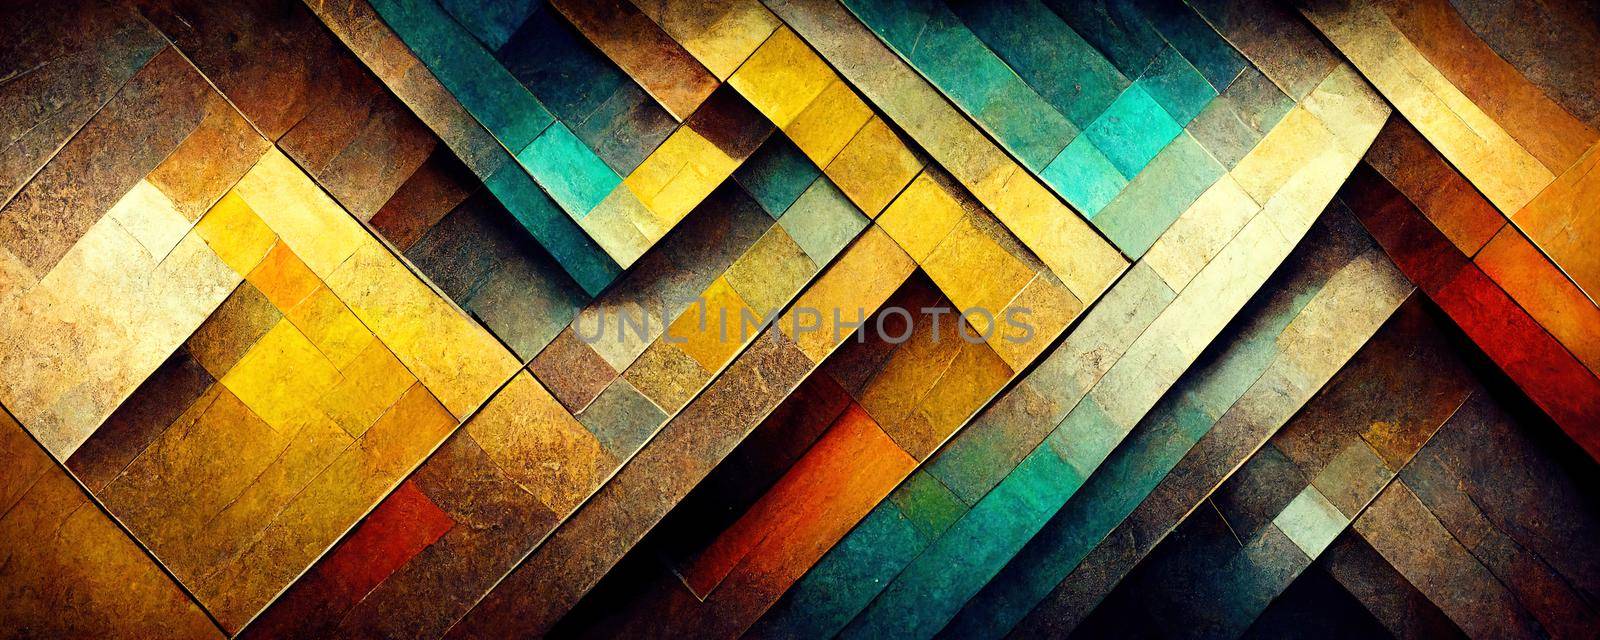 stylish background with golden abstract geometric pattern.